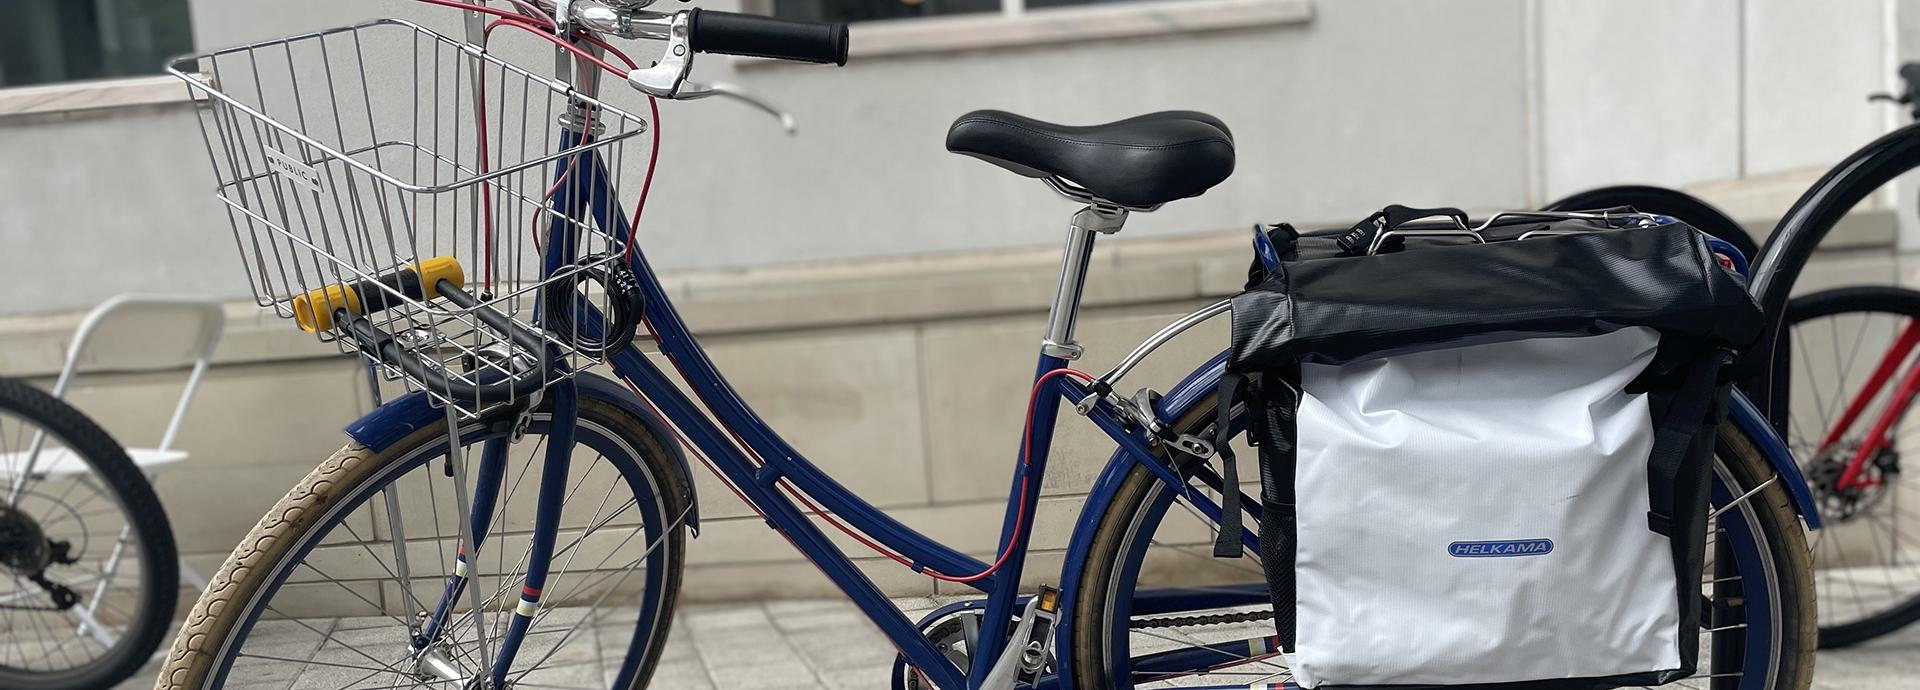 A dark blue bicycle that has a basket in the front and panniers in the back.